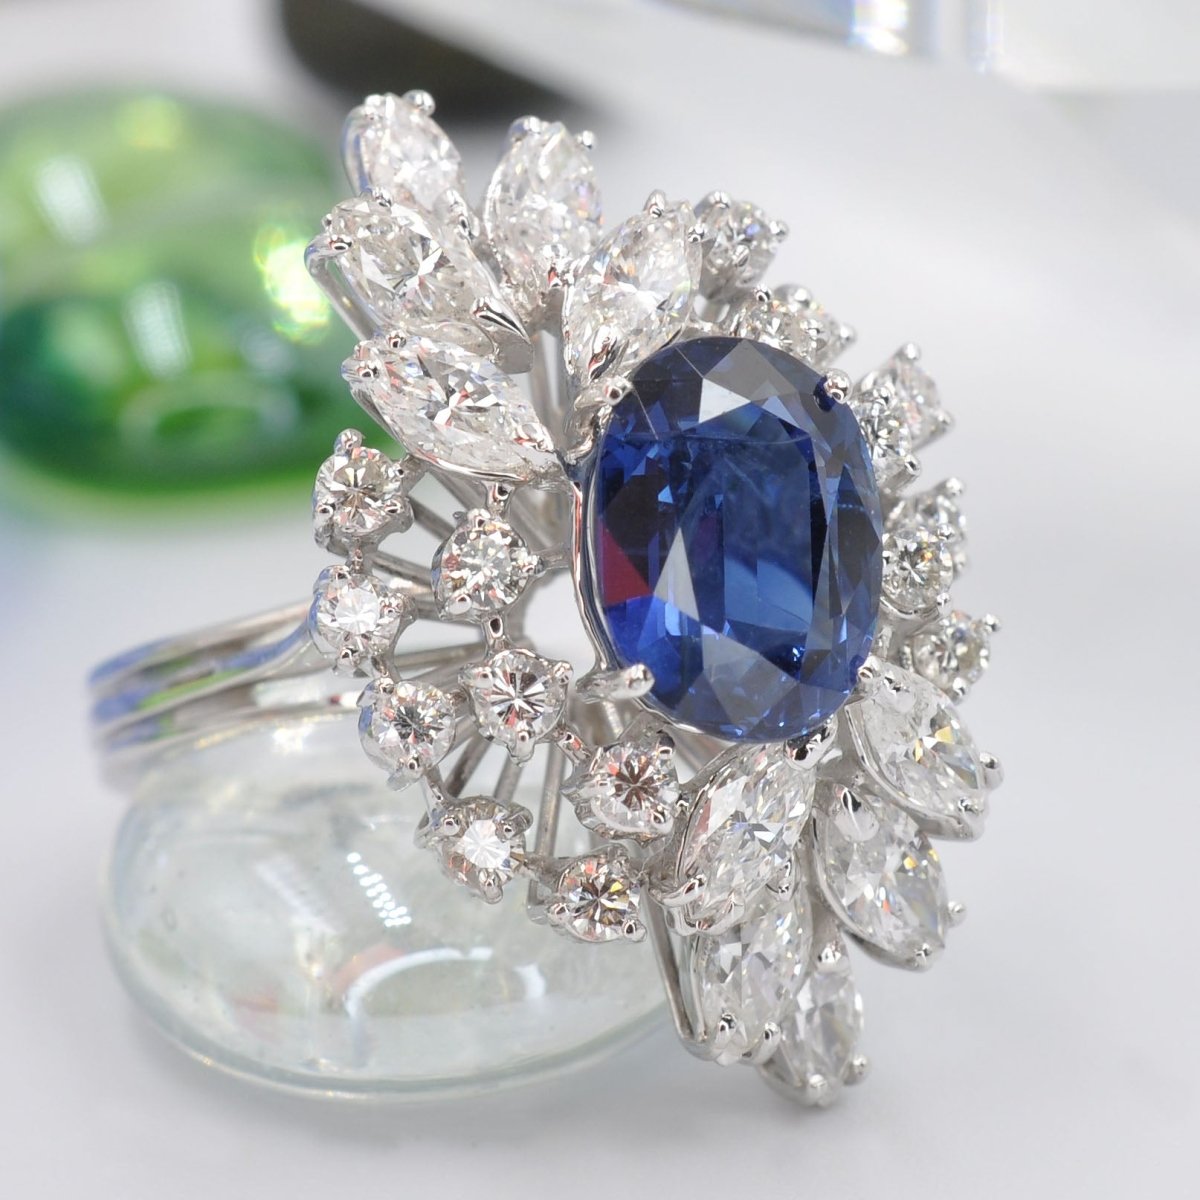 Certified 6.30CT Oval, Round, and Marquise Cut Diamond and Blue Sapphire Engagement Ring in 18KT White Gold - Primestyle.com